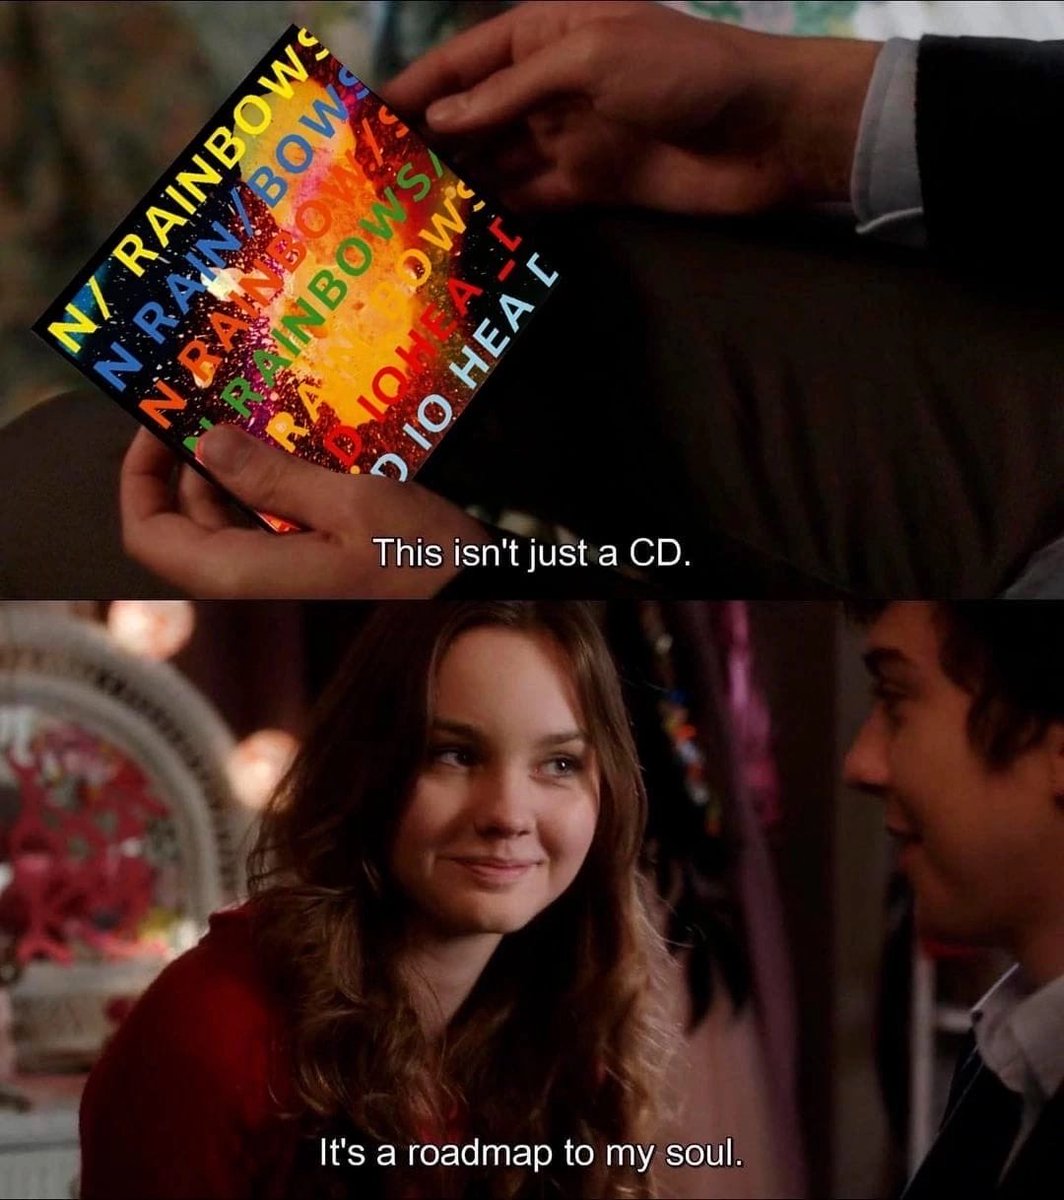 This isn’t just a CD